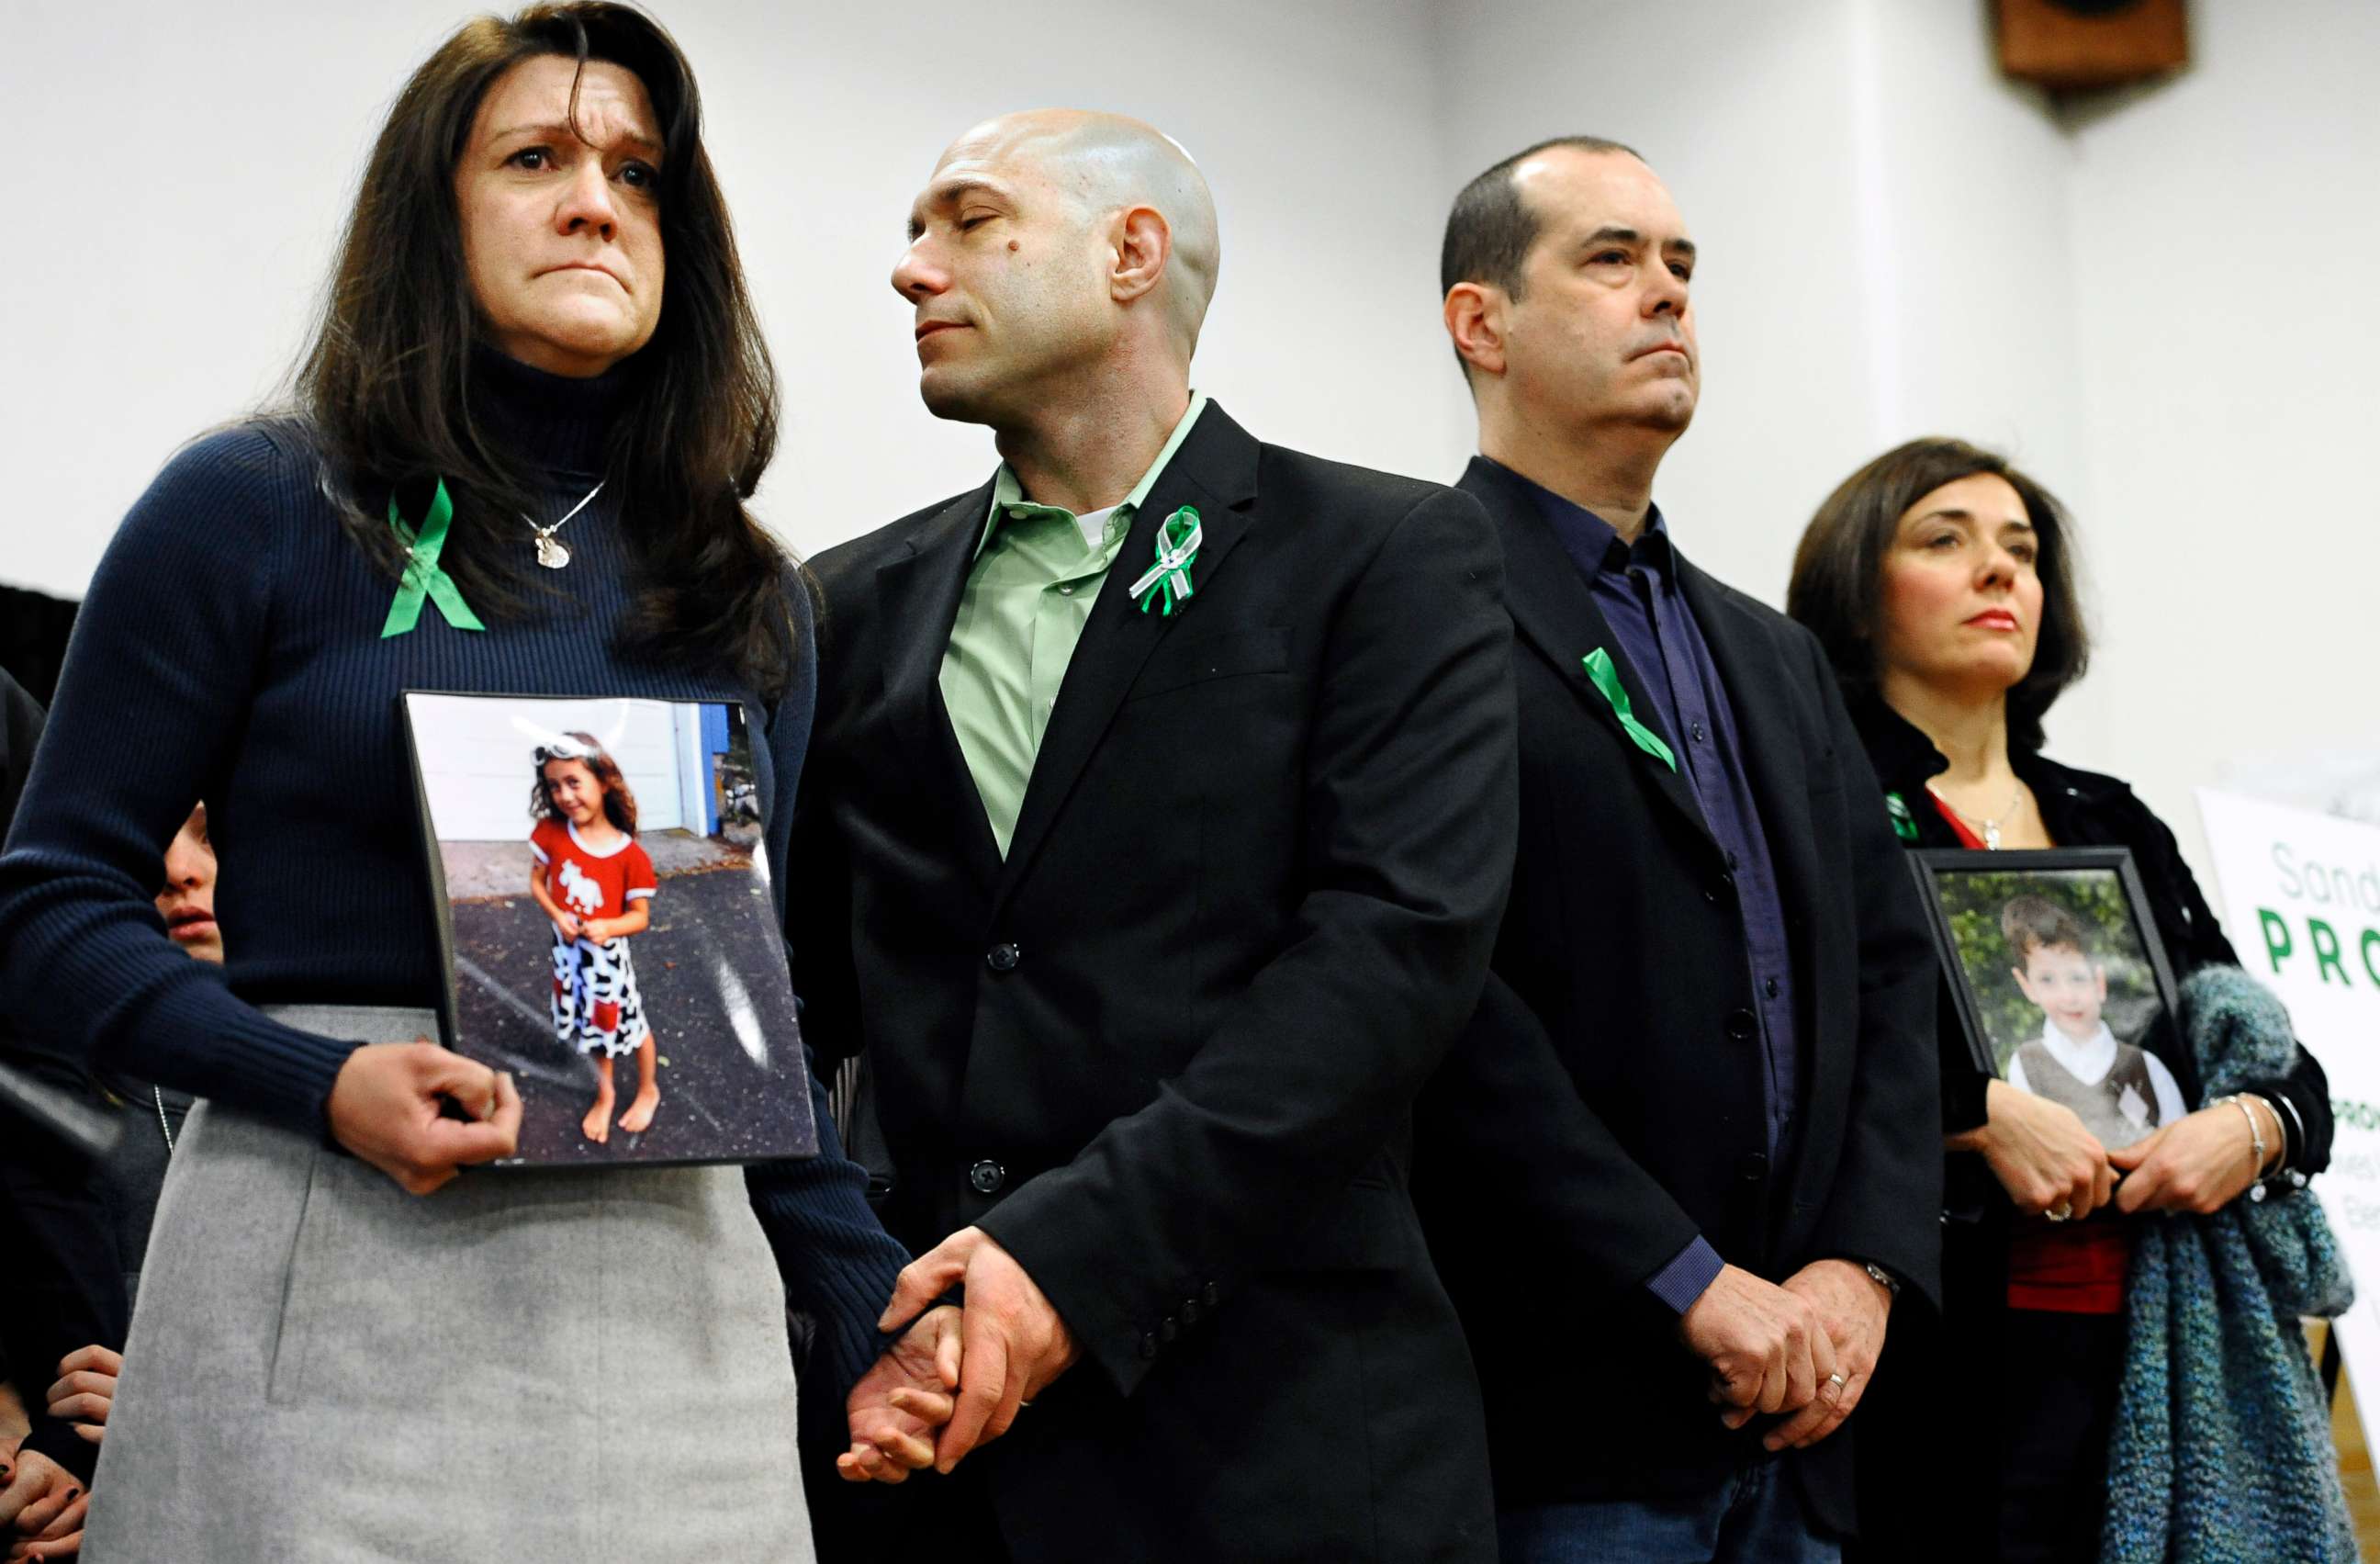 PHOTO: Jennifer Hensel and Jeremy Richman, parents of Sandy Hook School shooting victim Avielle Rose Richman, listen at a news conference at Edmond Town Hall in Newtown, Conn., Jan. 14, 2013.